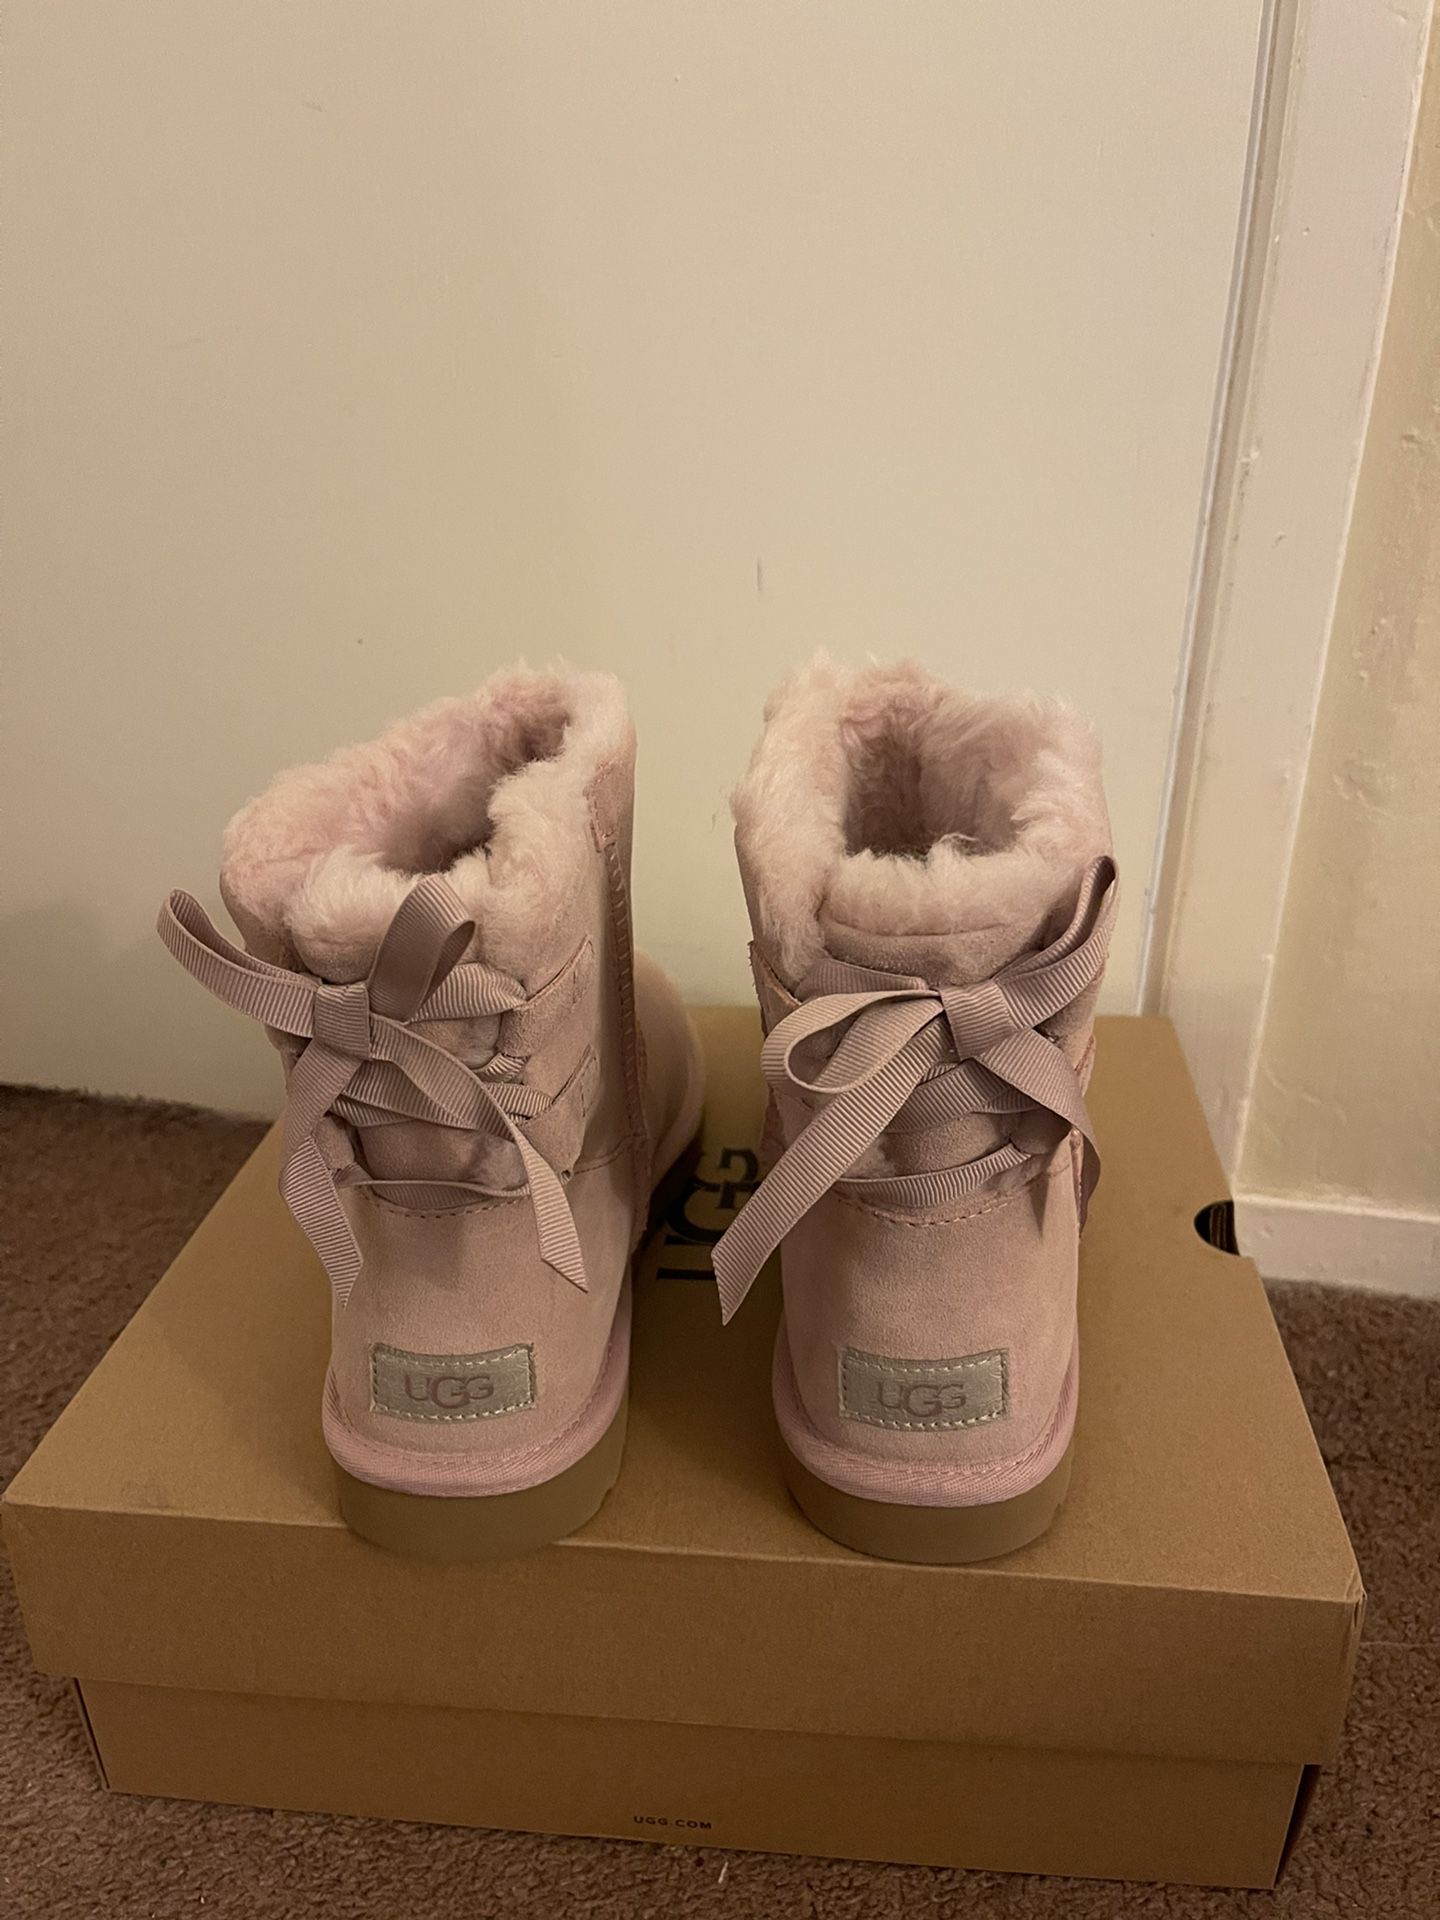 100% Authentic Brand New in Box UGG Mini Continuity Bow Boots / Women size 5, 6, 8 / Color: Pink Crystal 